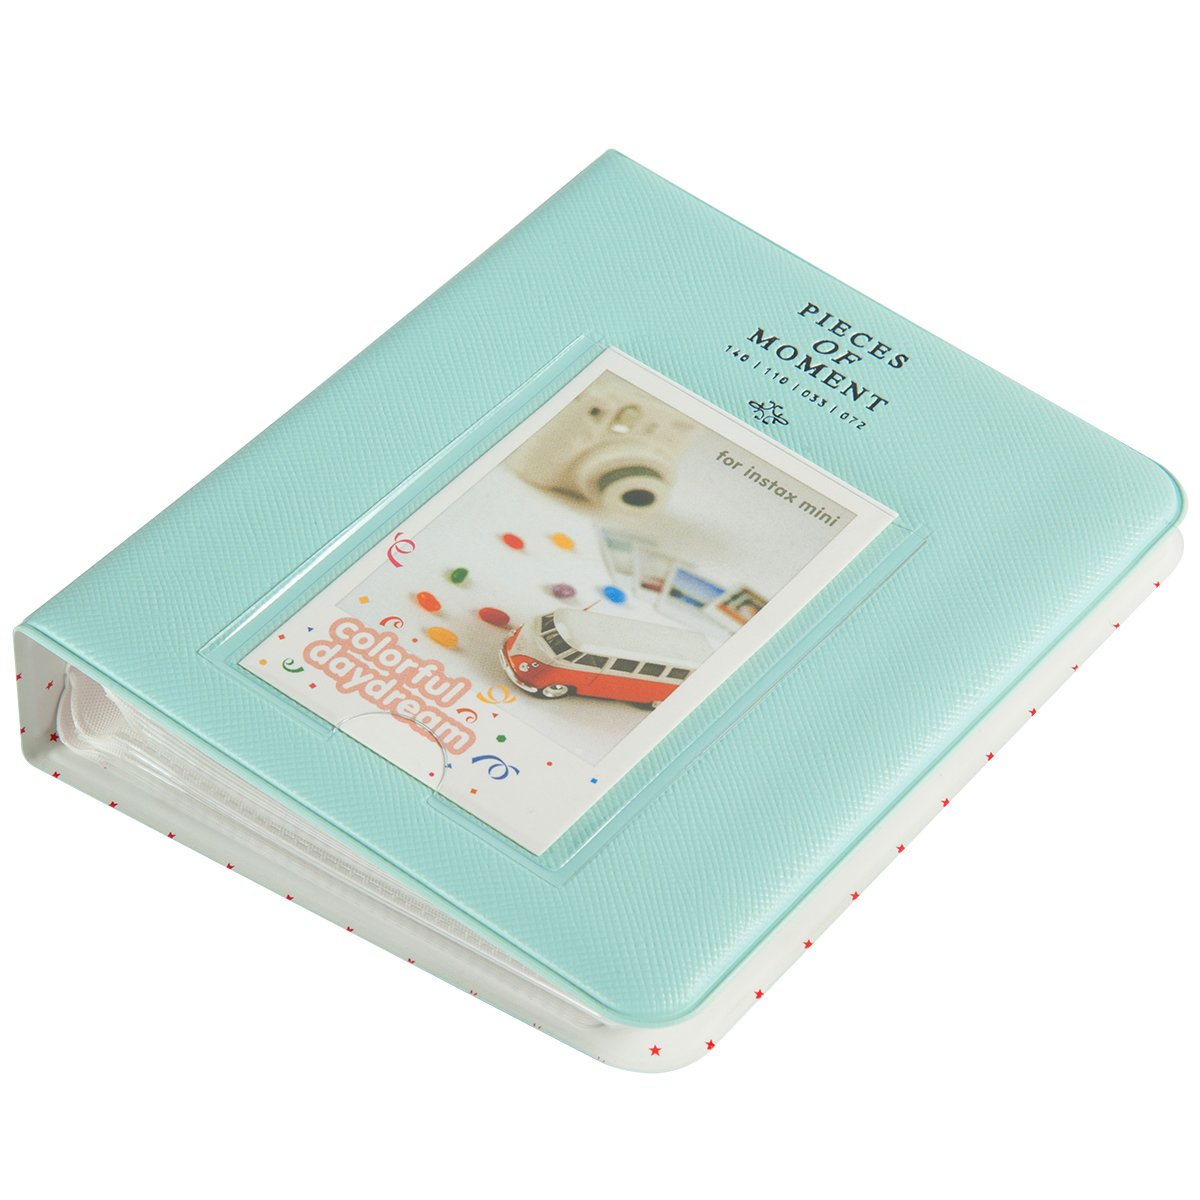 Fujifilm Instax Mini 10X1candy pop Instant Film with Instax Time Photo Album 64 Sheets (ice blue)